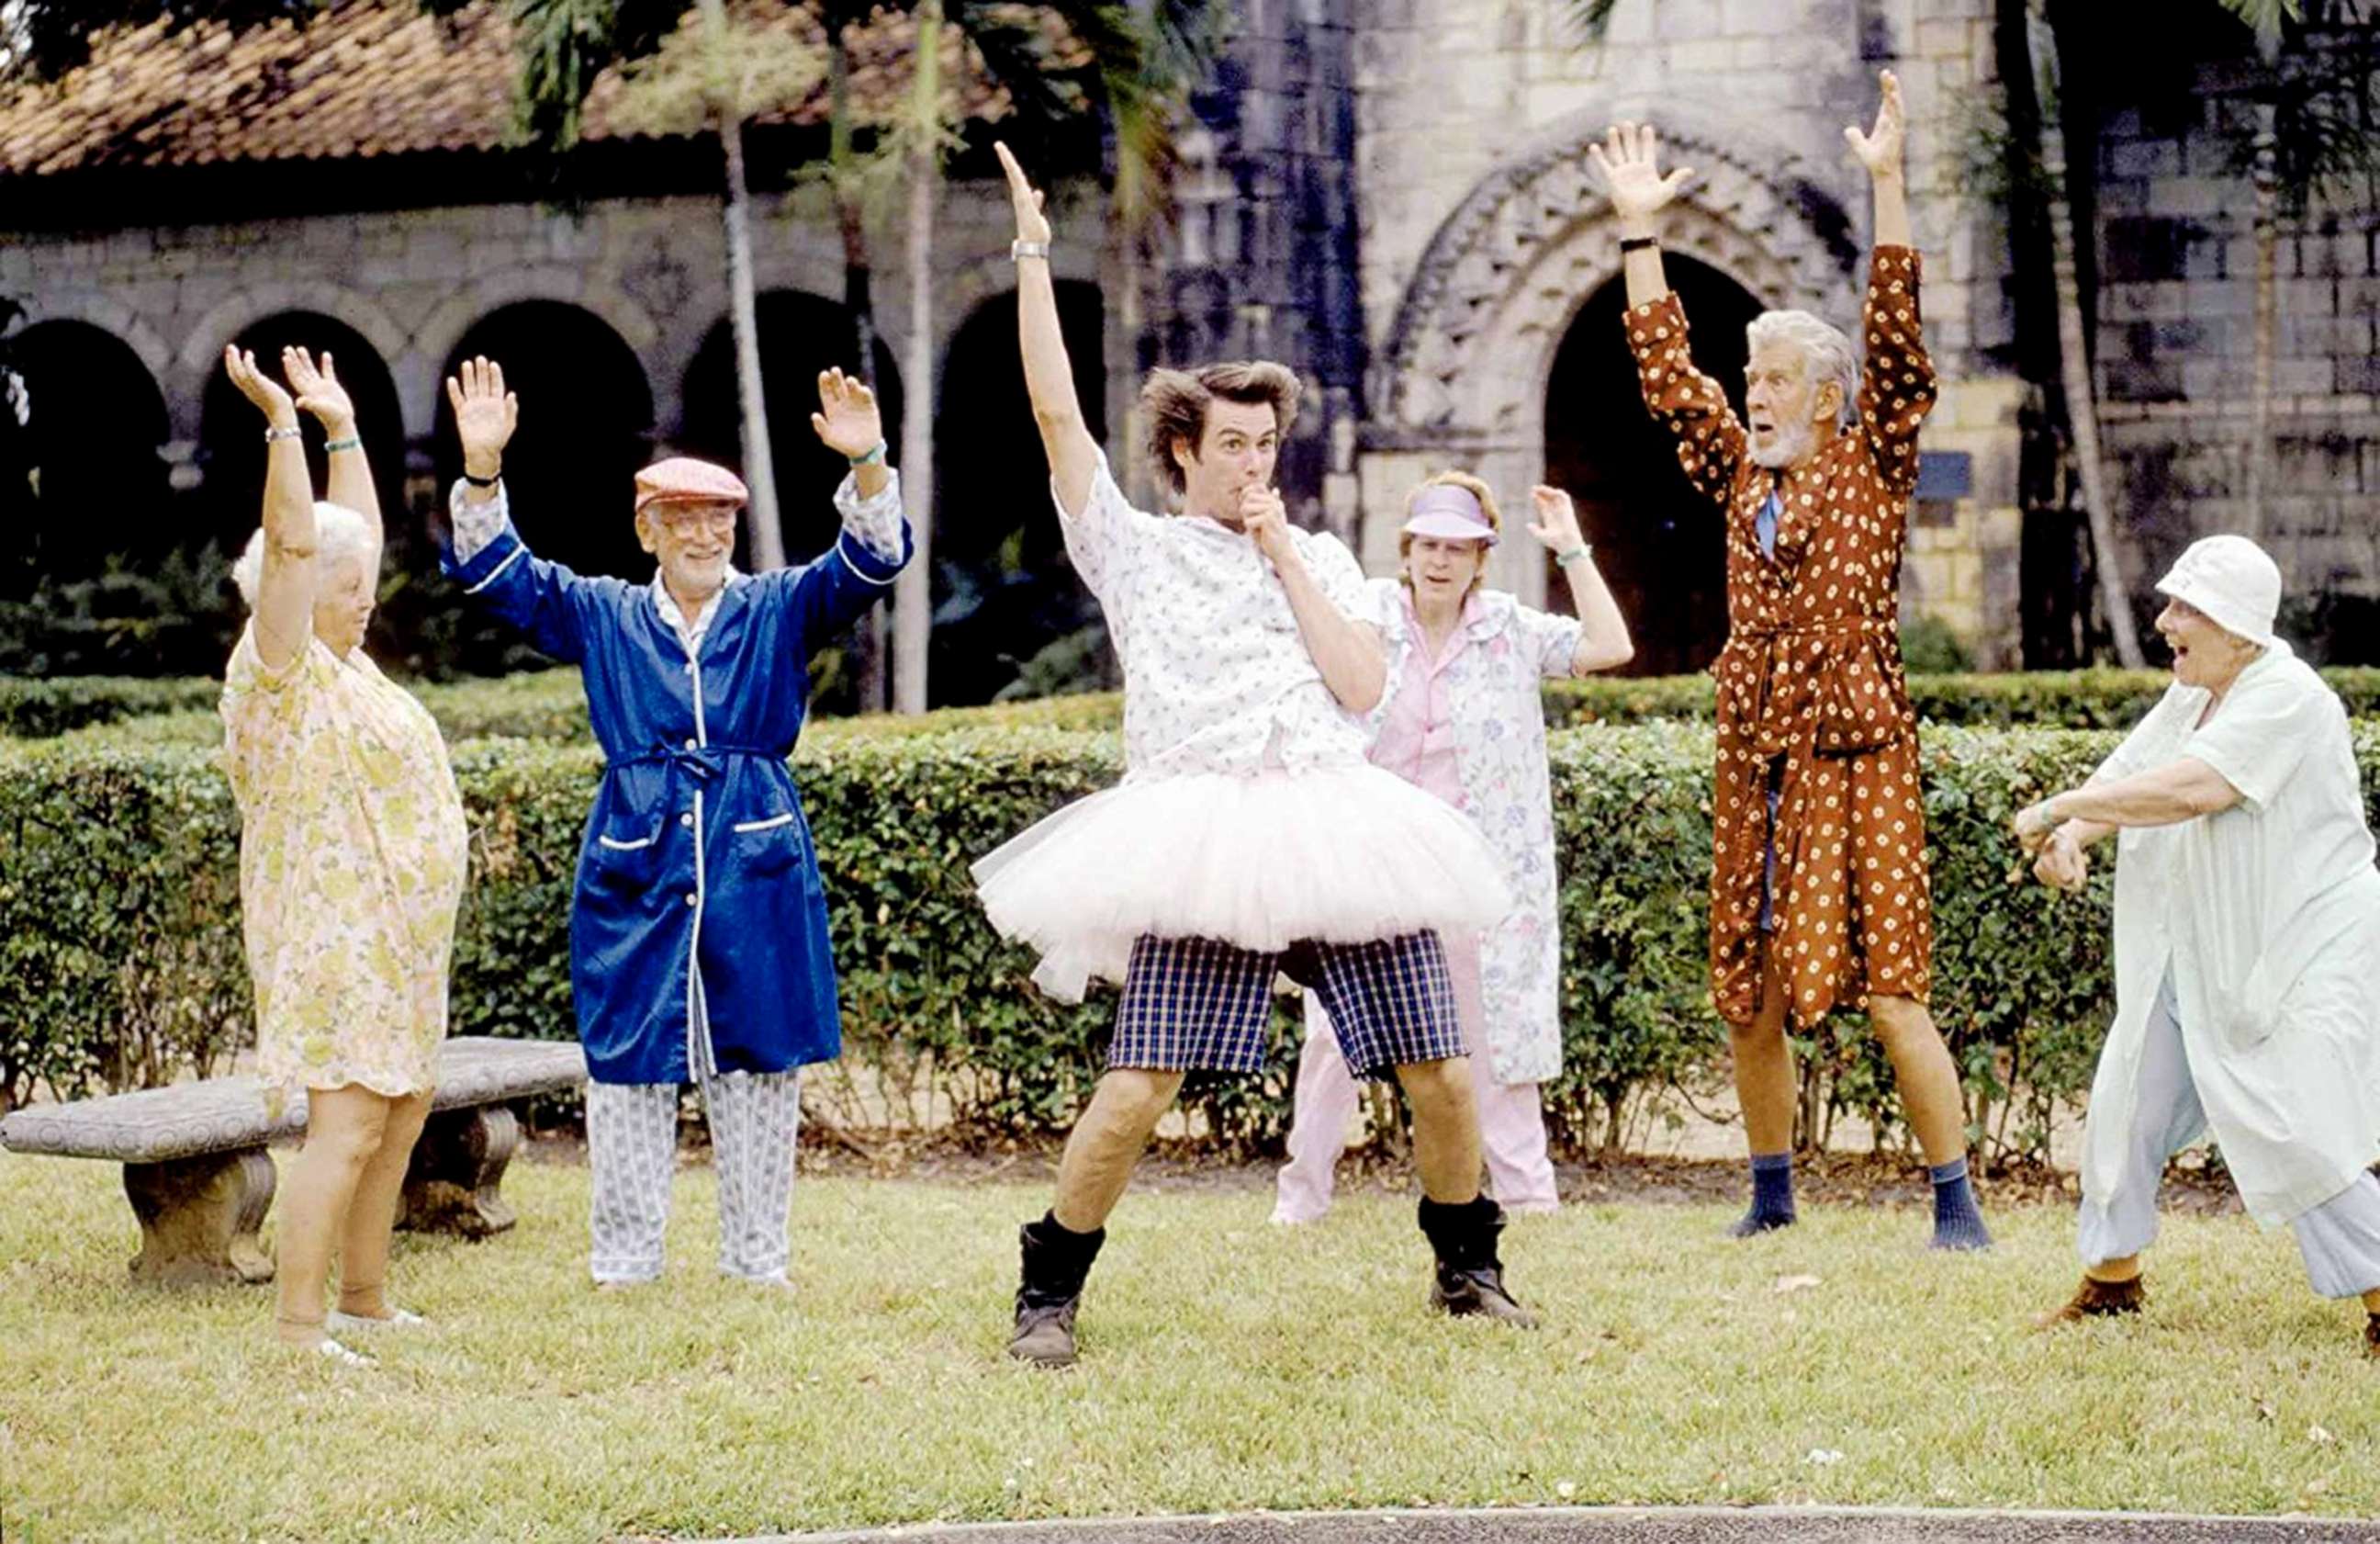 PHOTO: Jim Carrey appears in a scene from "Ace Ventura: Pet Detective."